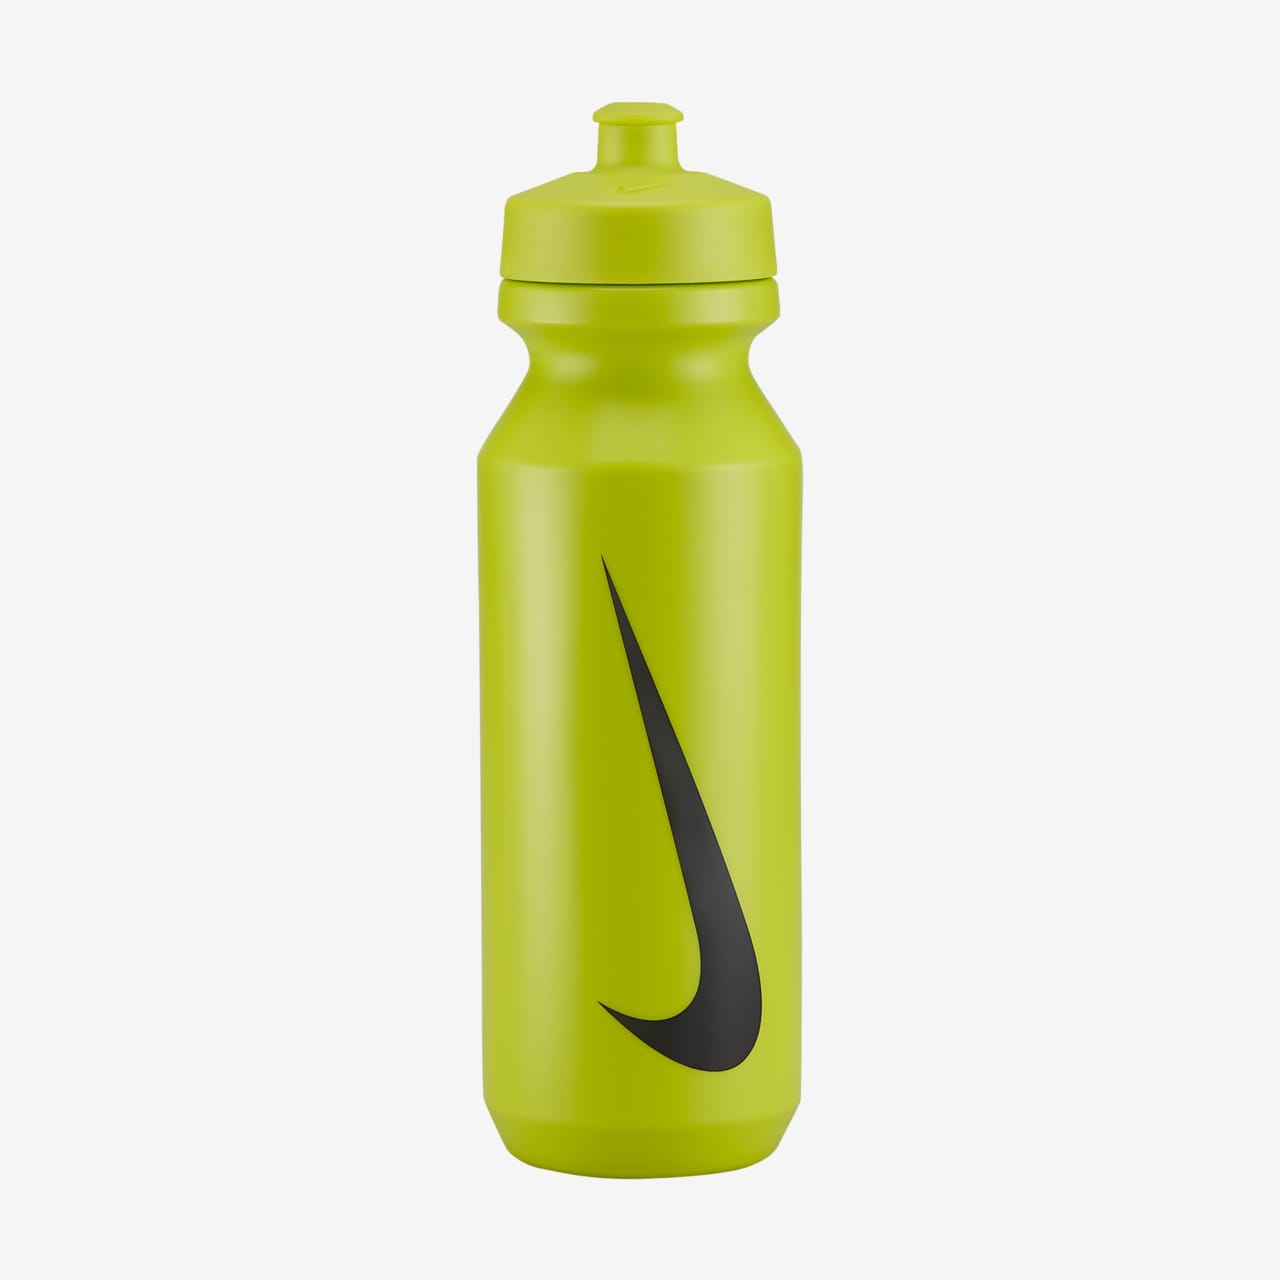 https://static.nike.com/a/images/t_PDP_1280_v1/f_auto/2b4cc571-ffc9-4c2a-9e24-6d509090996f/32oz-big-mouth-water-bottle-1kn8d6.png